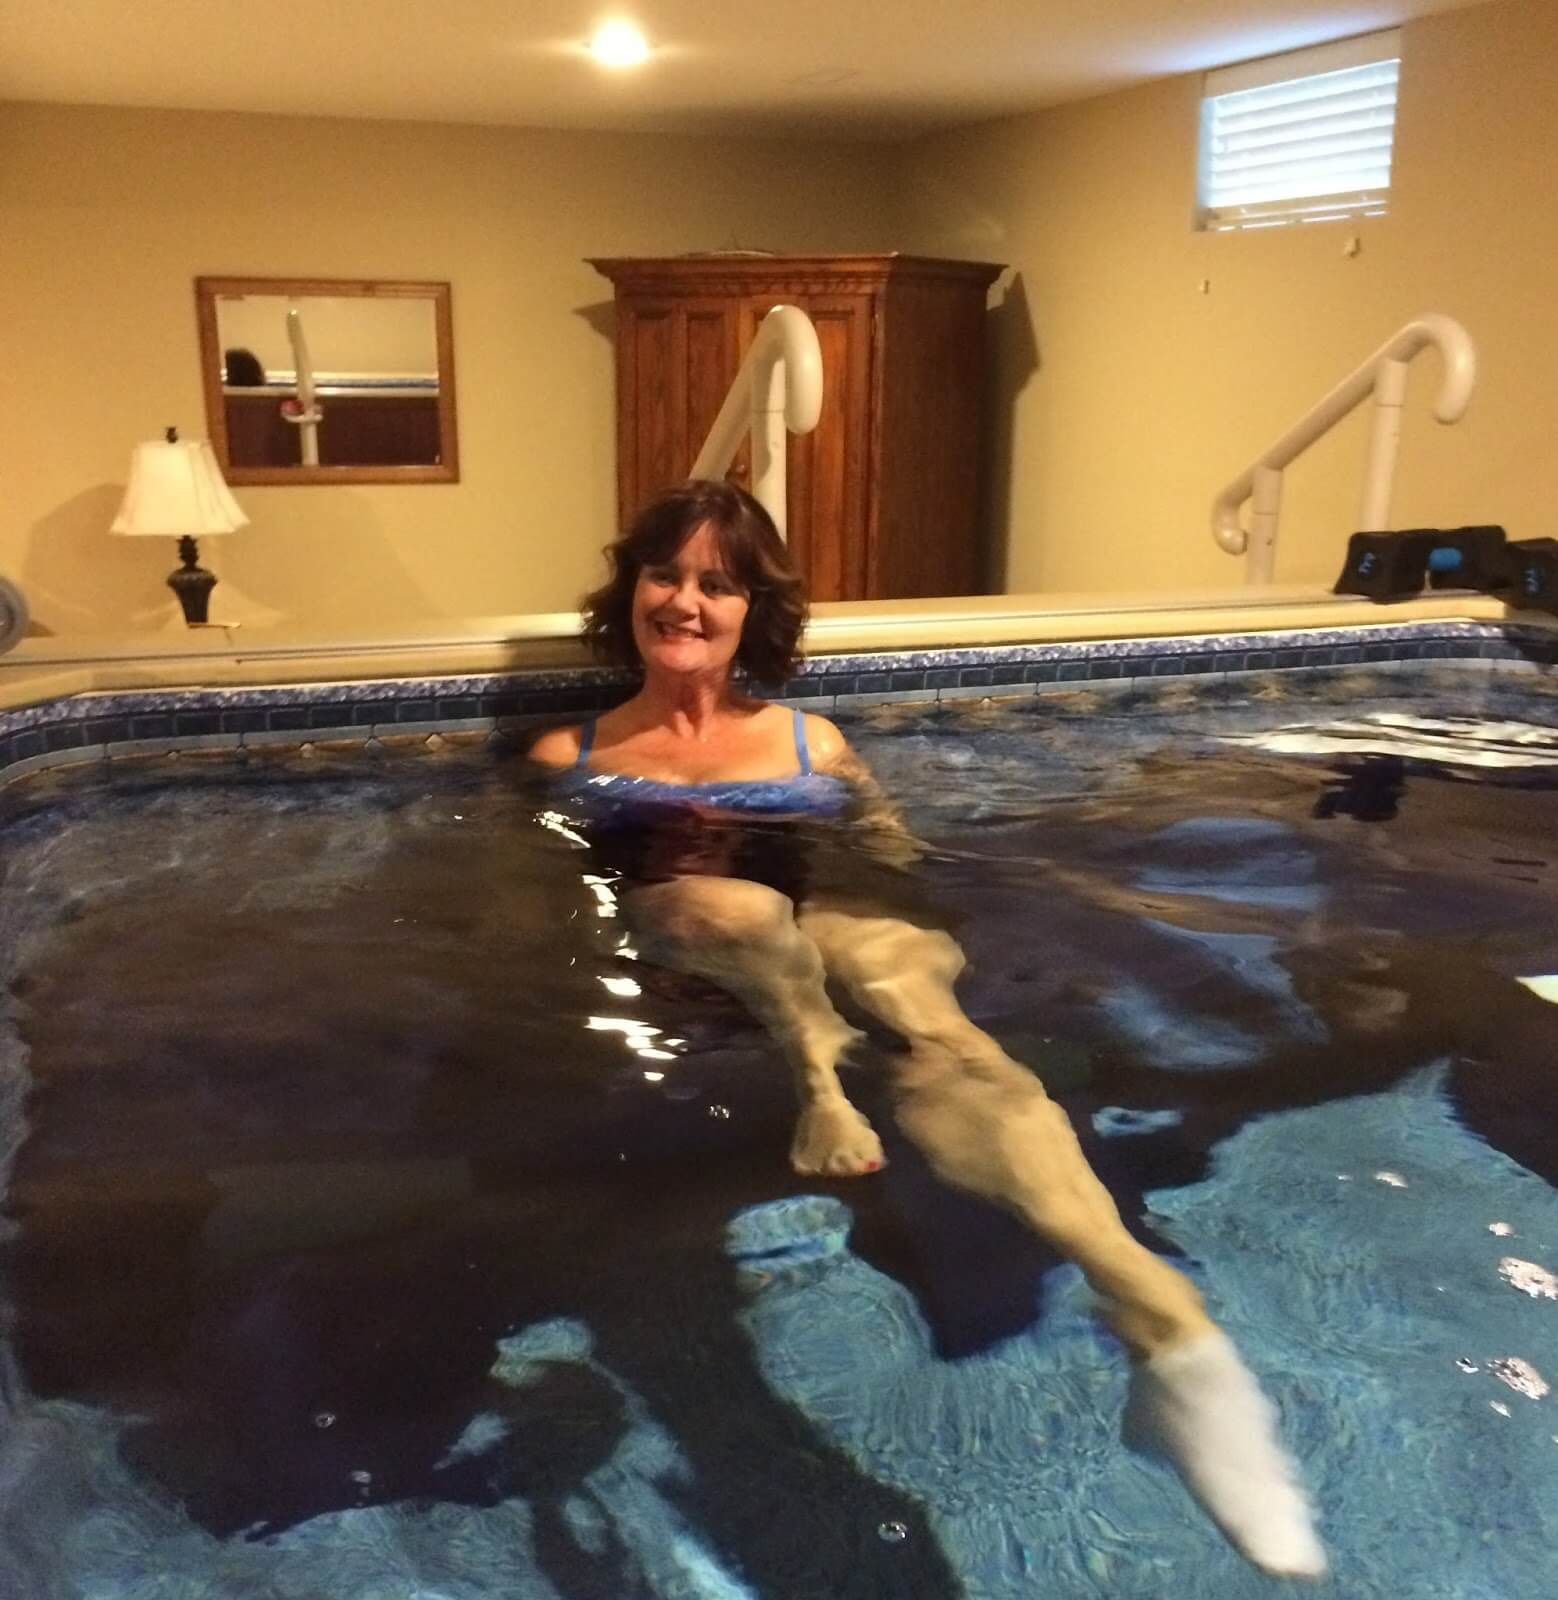 Deborah doing aquatic therapy exercises in her Endless Pools WaterWell